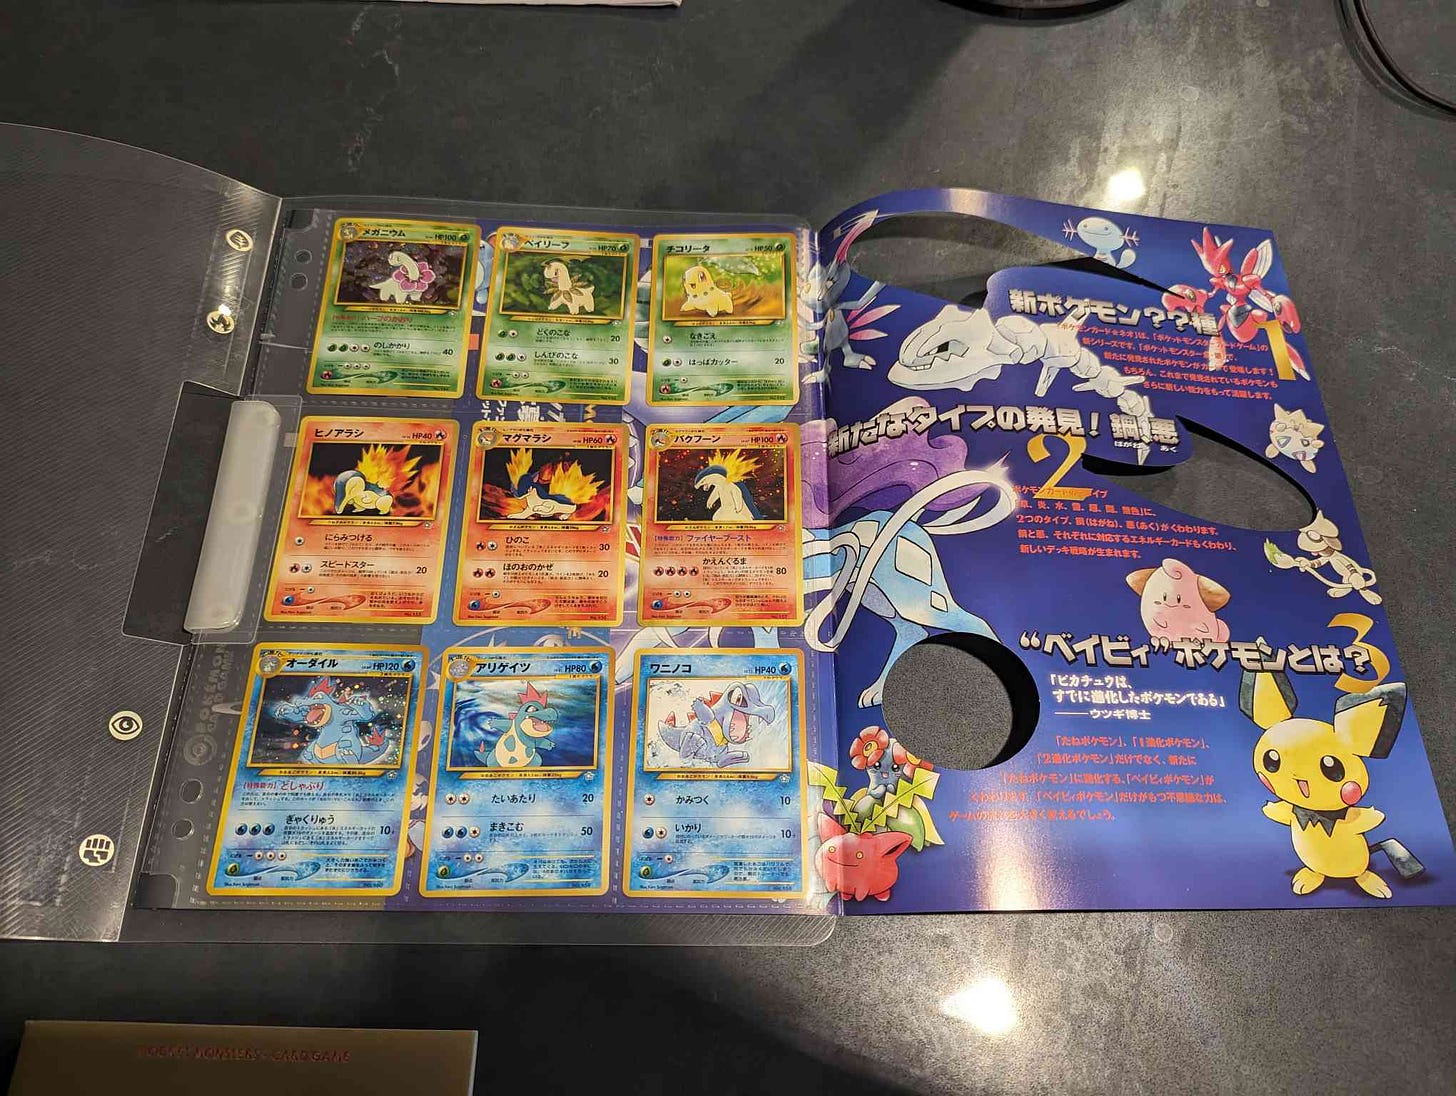 A photograph inside of Jaxel's Japanese Neo Genesis Premium File, showing Pokémon cards of all nine Johto starters, and their evolutions